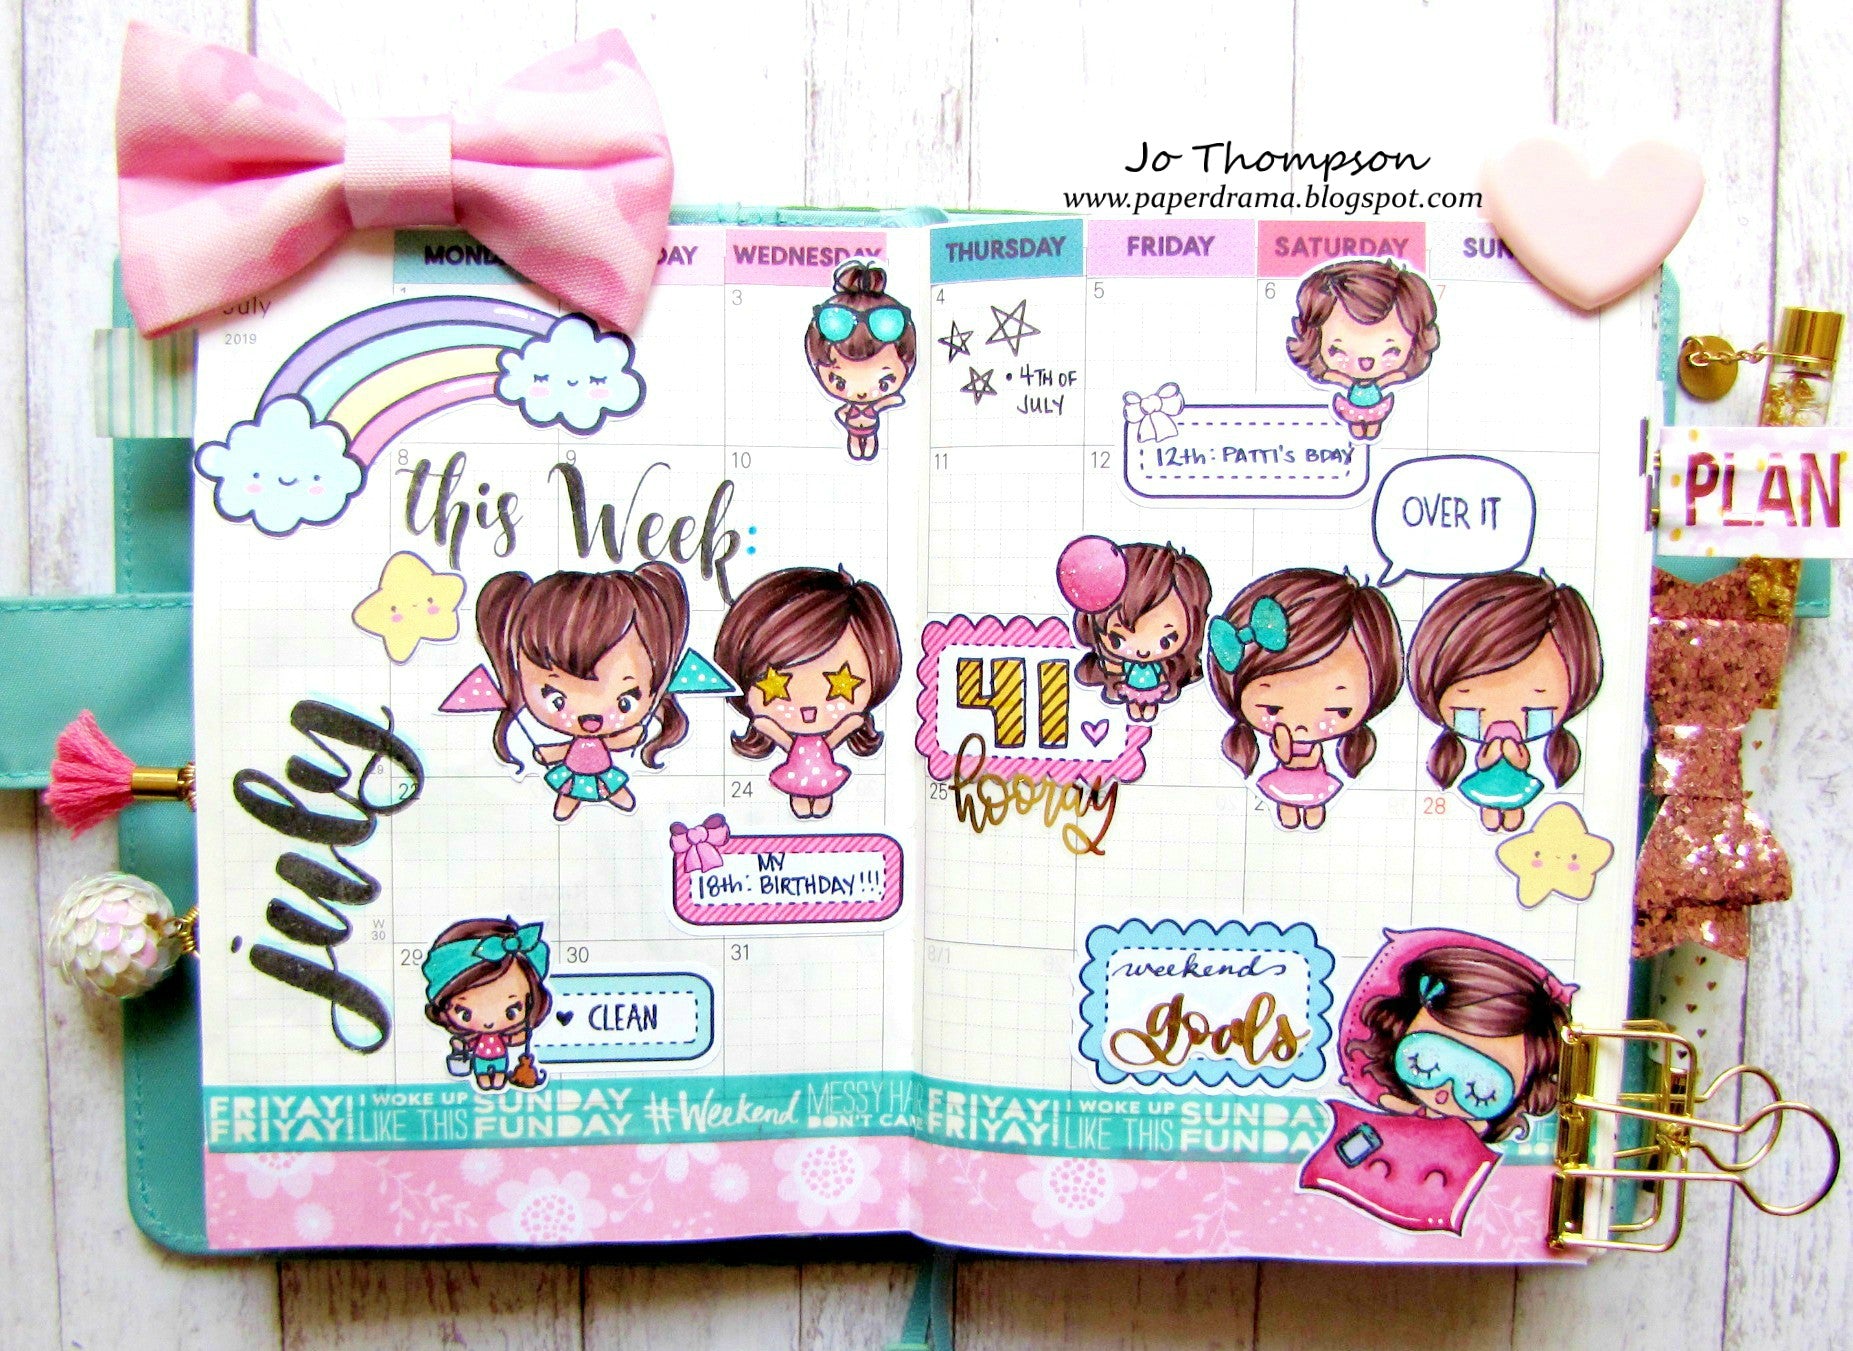 Guest Designer Jo Thompson with her July Planner Page!